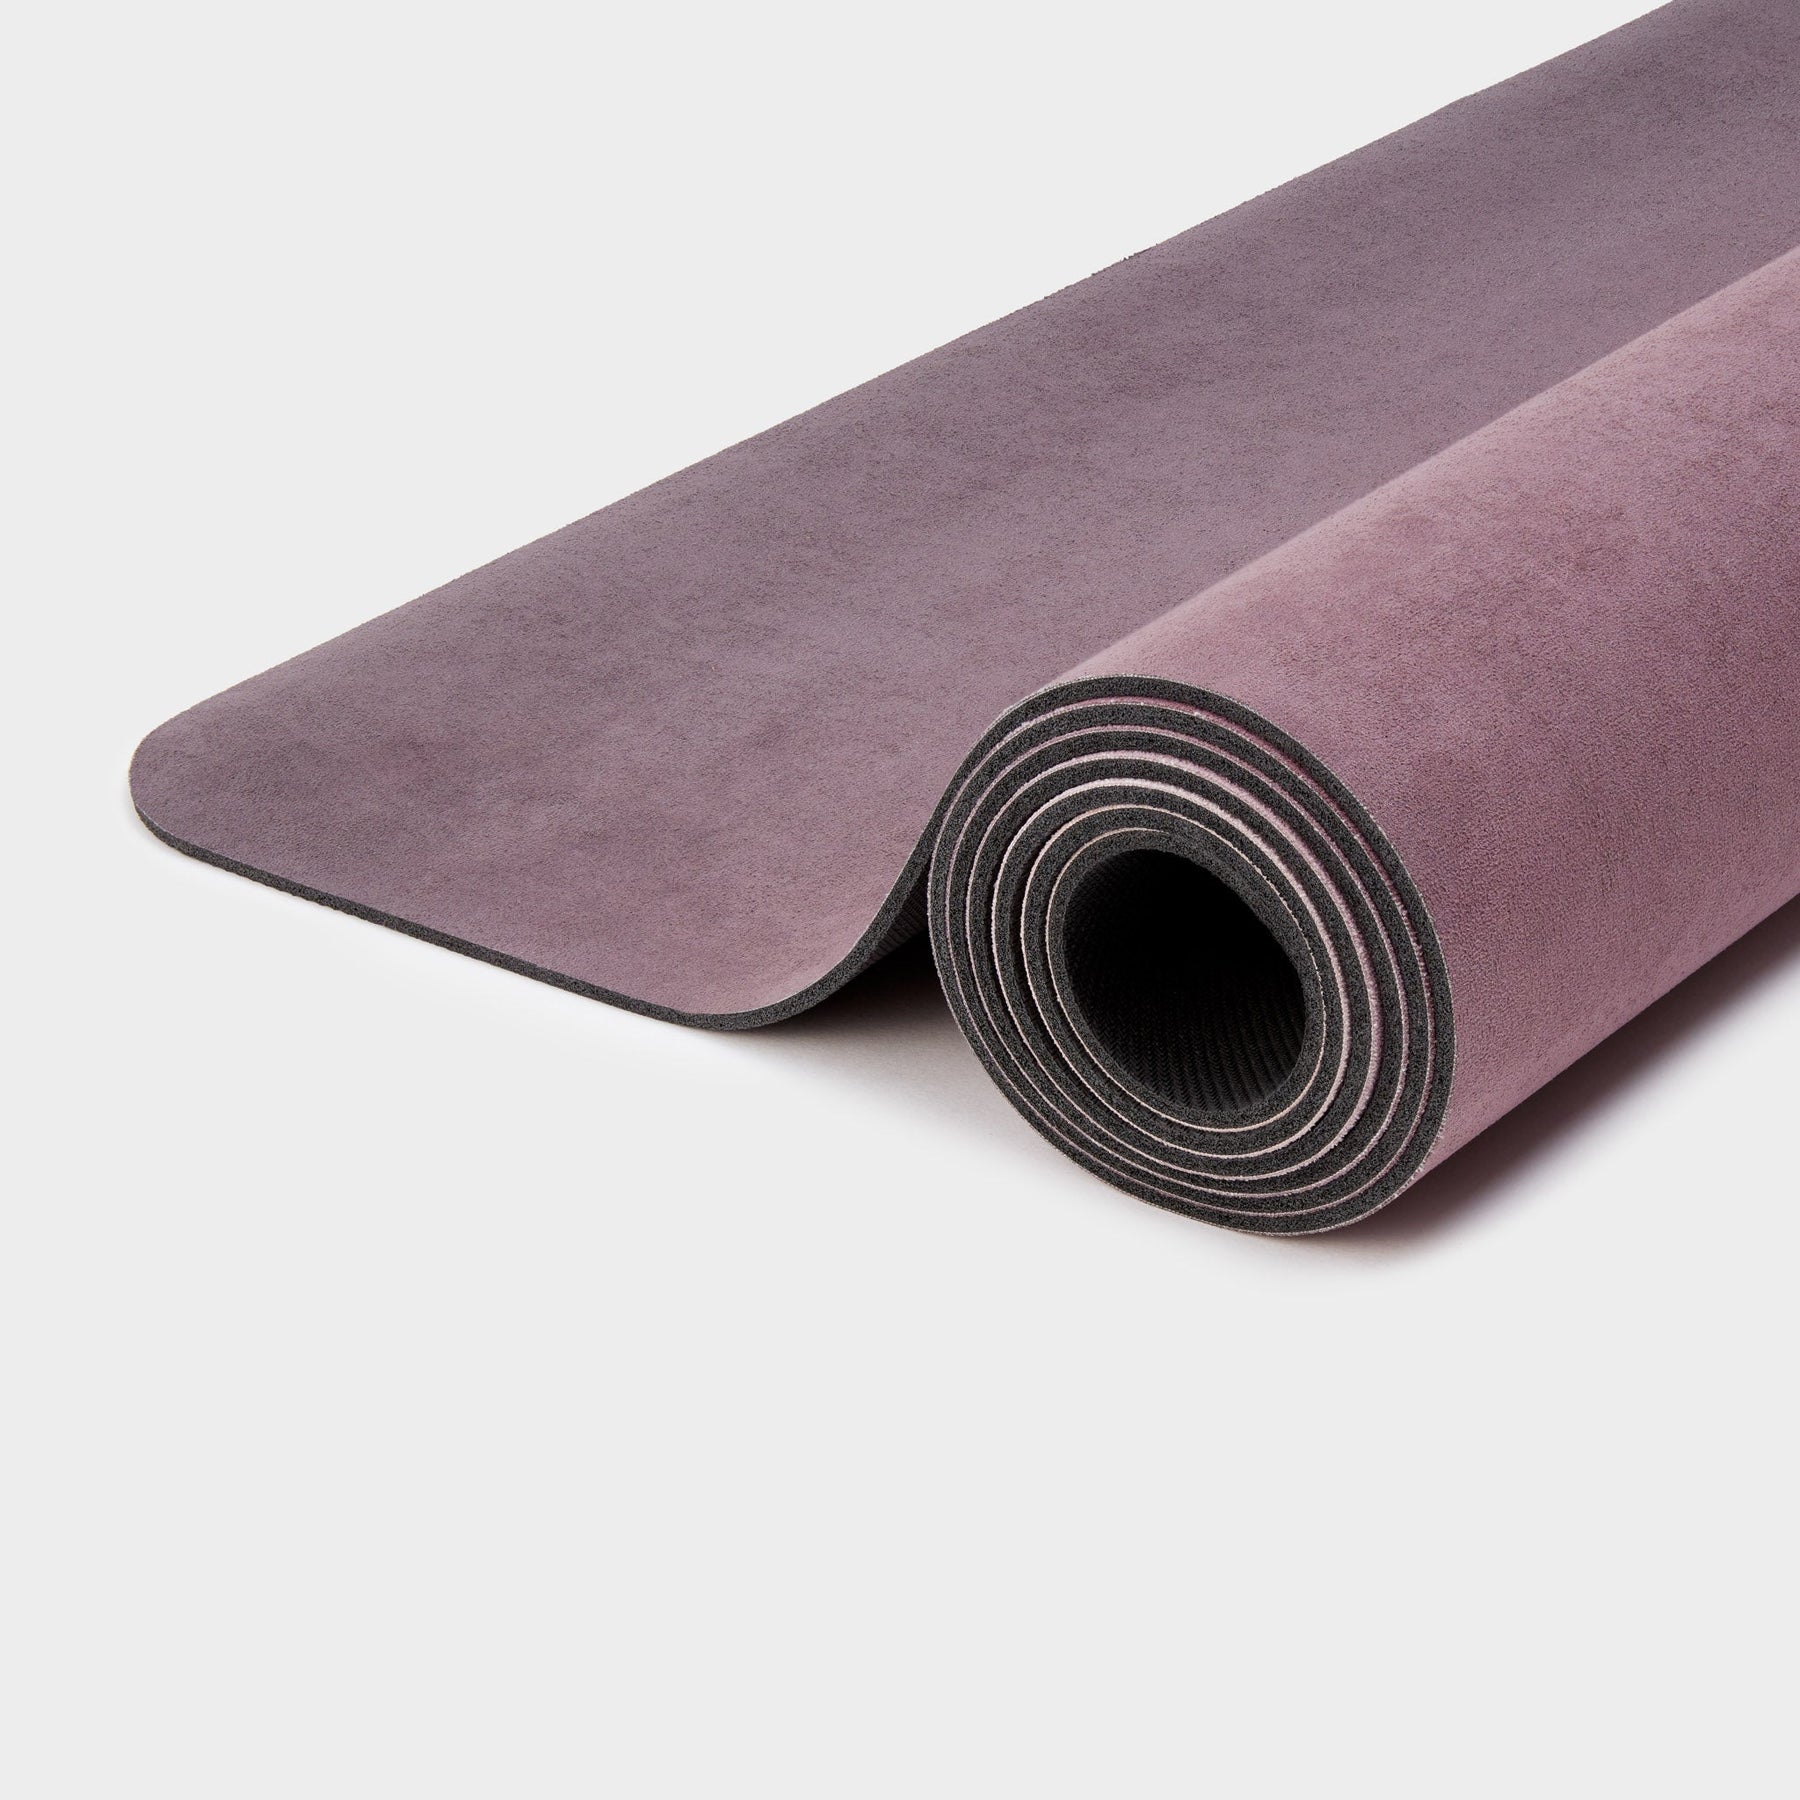 4mm Yoga Mat - Suede - Blush Ombre